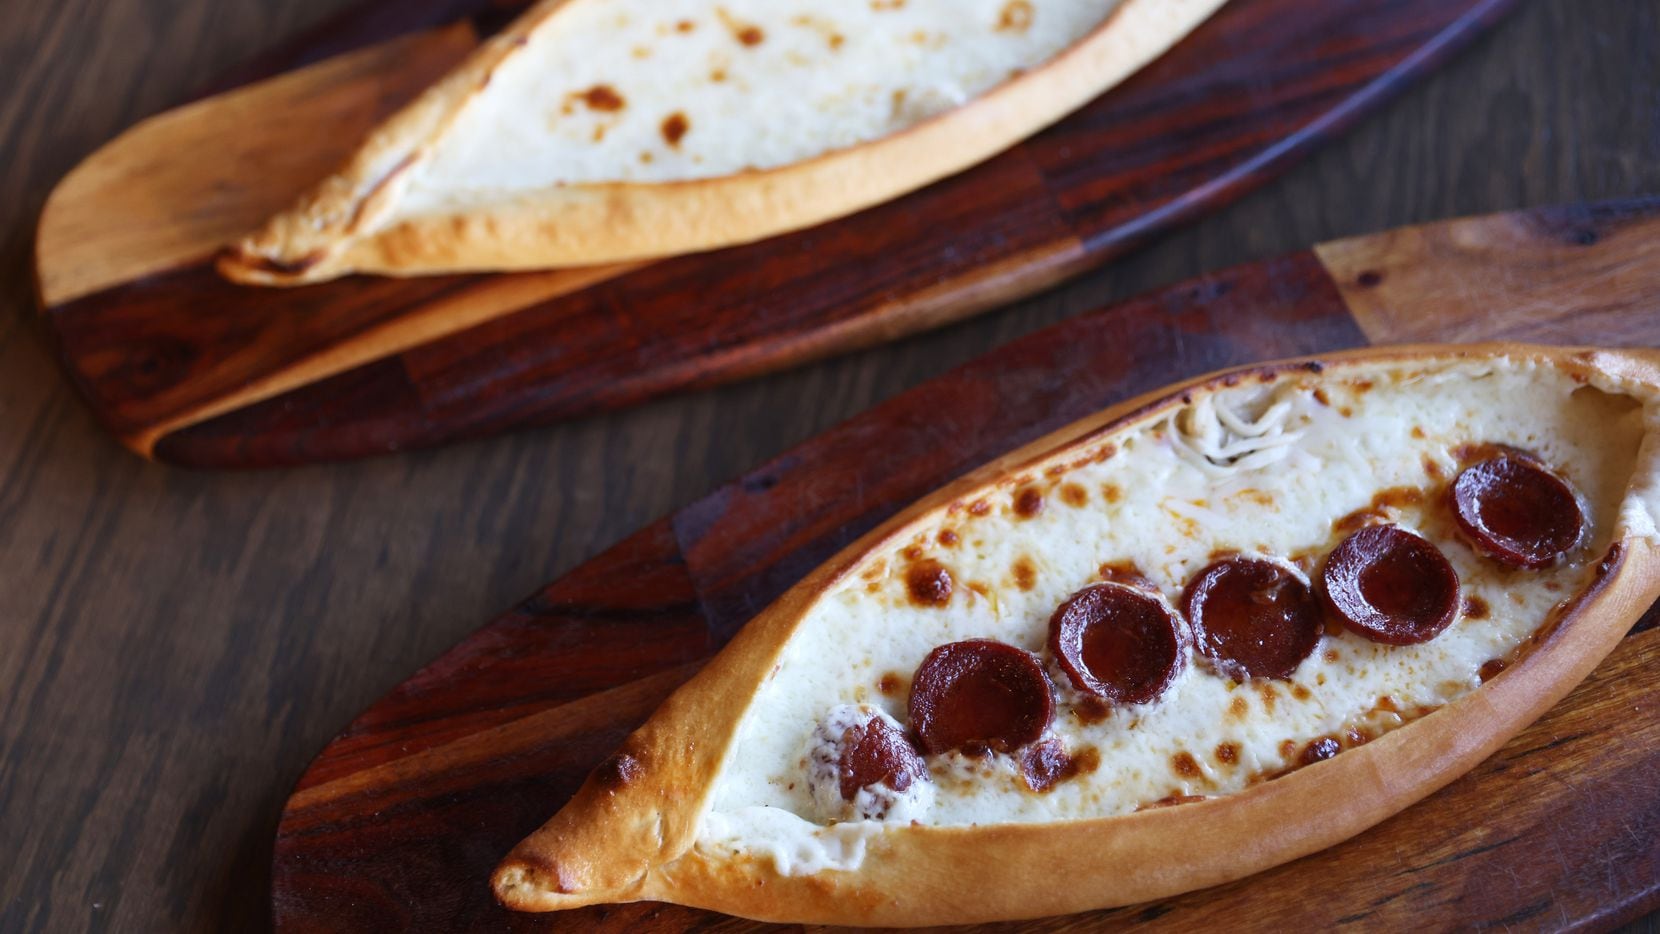 Lezzet Cafe offers several versions of pide, or Turkish pizza, including kasarli, which is...